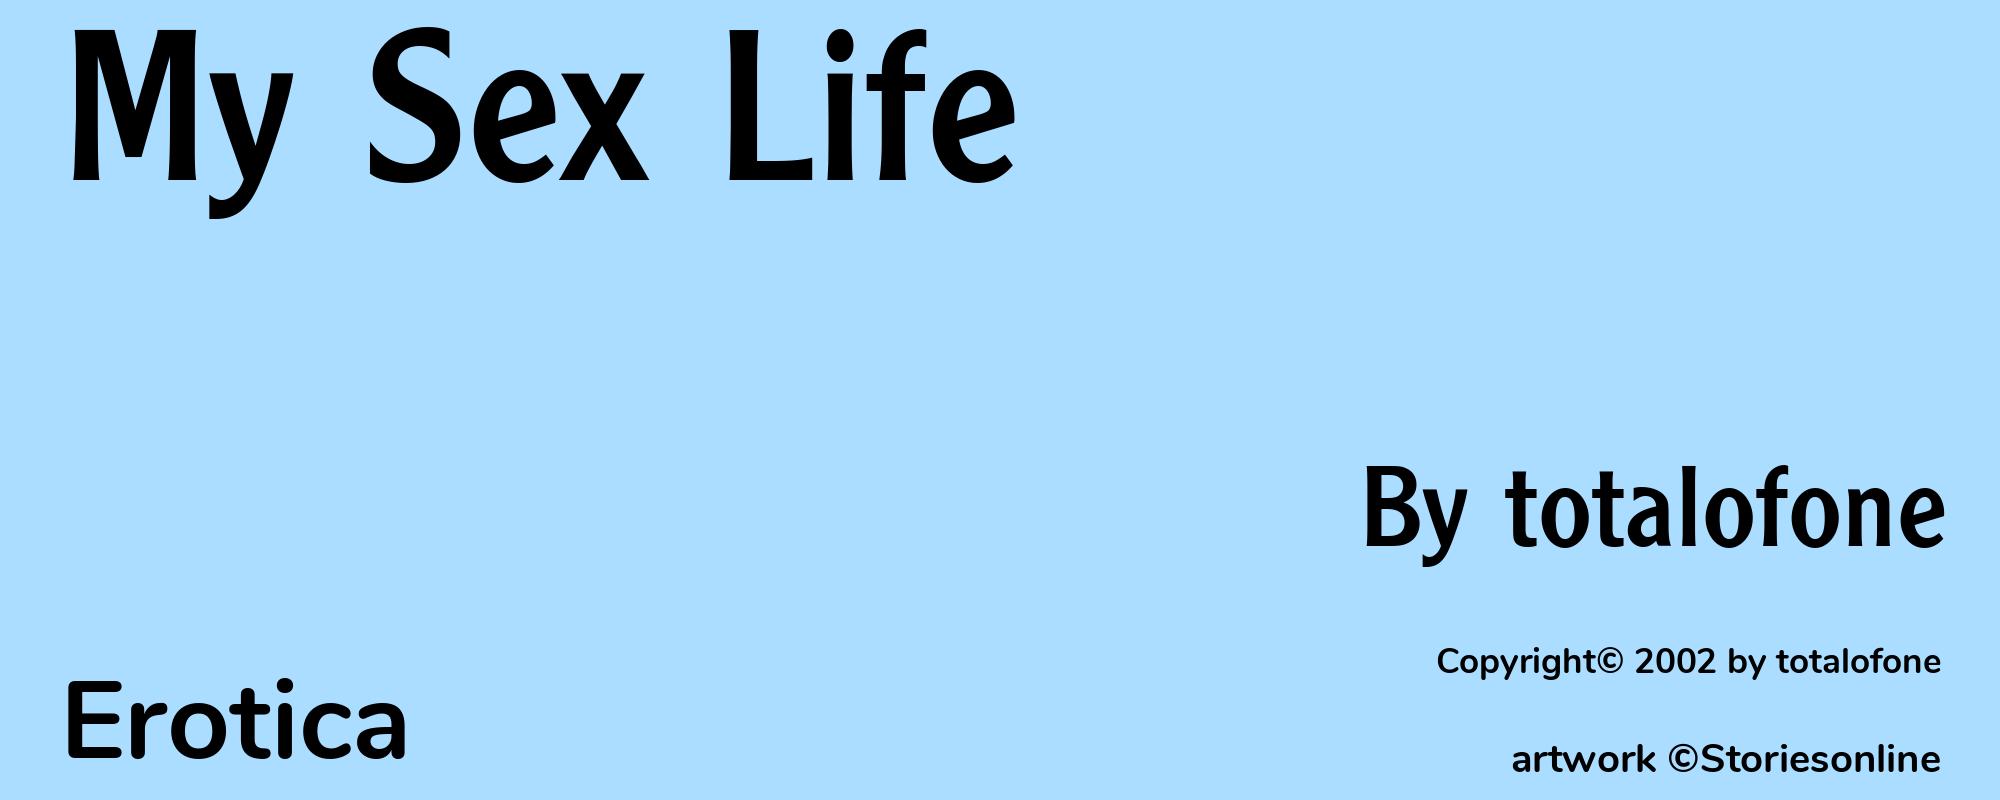 My Sex Life - Cover